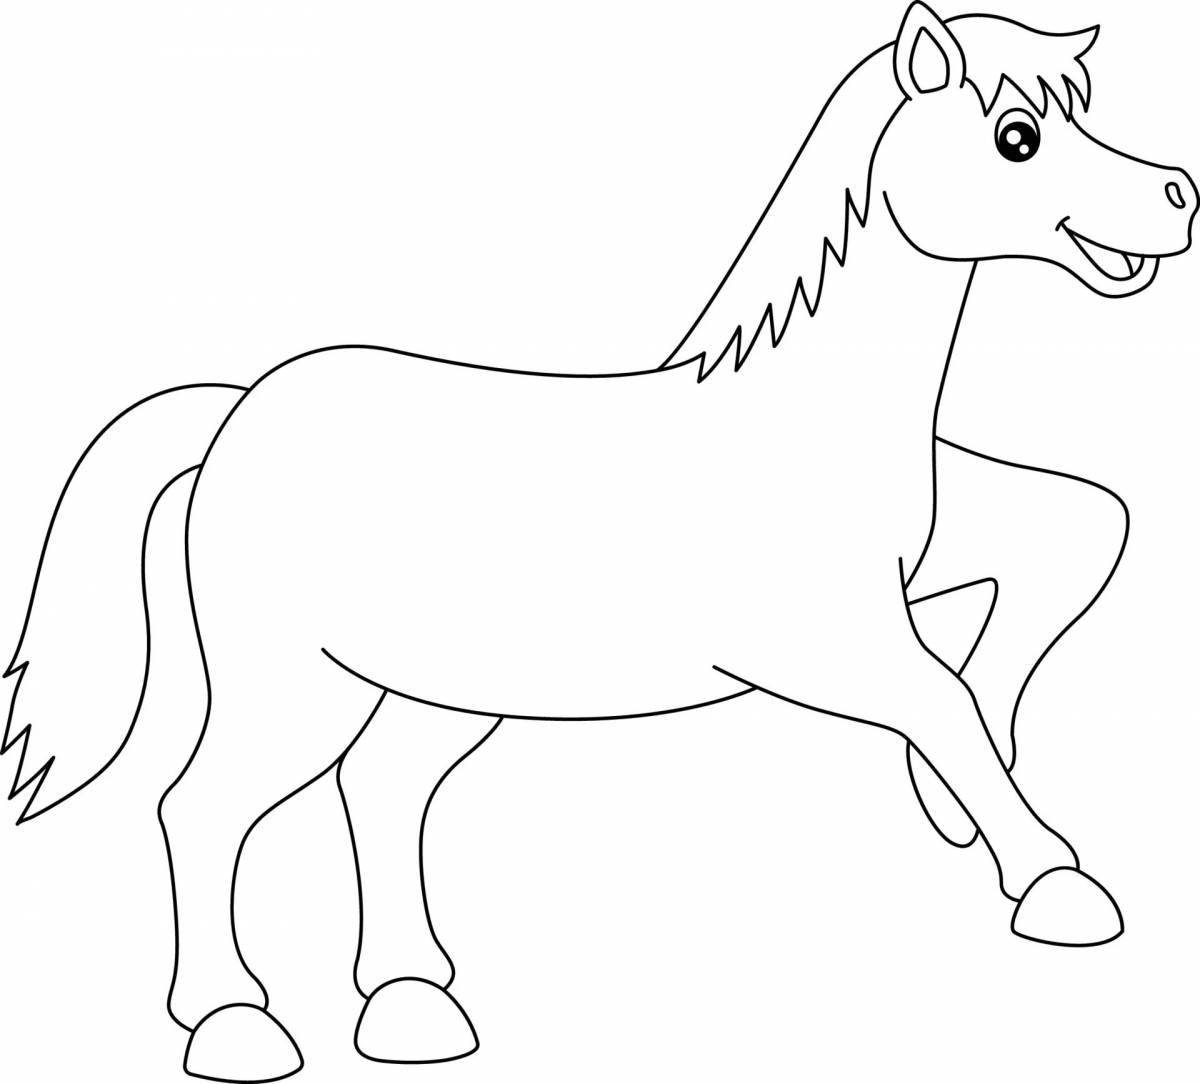 Coloring page dazzling horse for 3-4 year olds